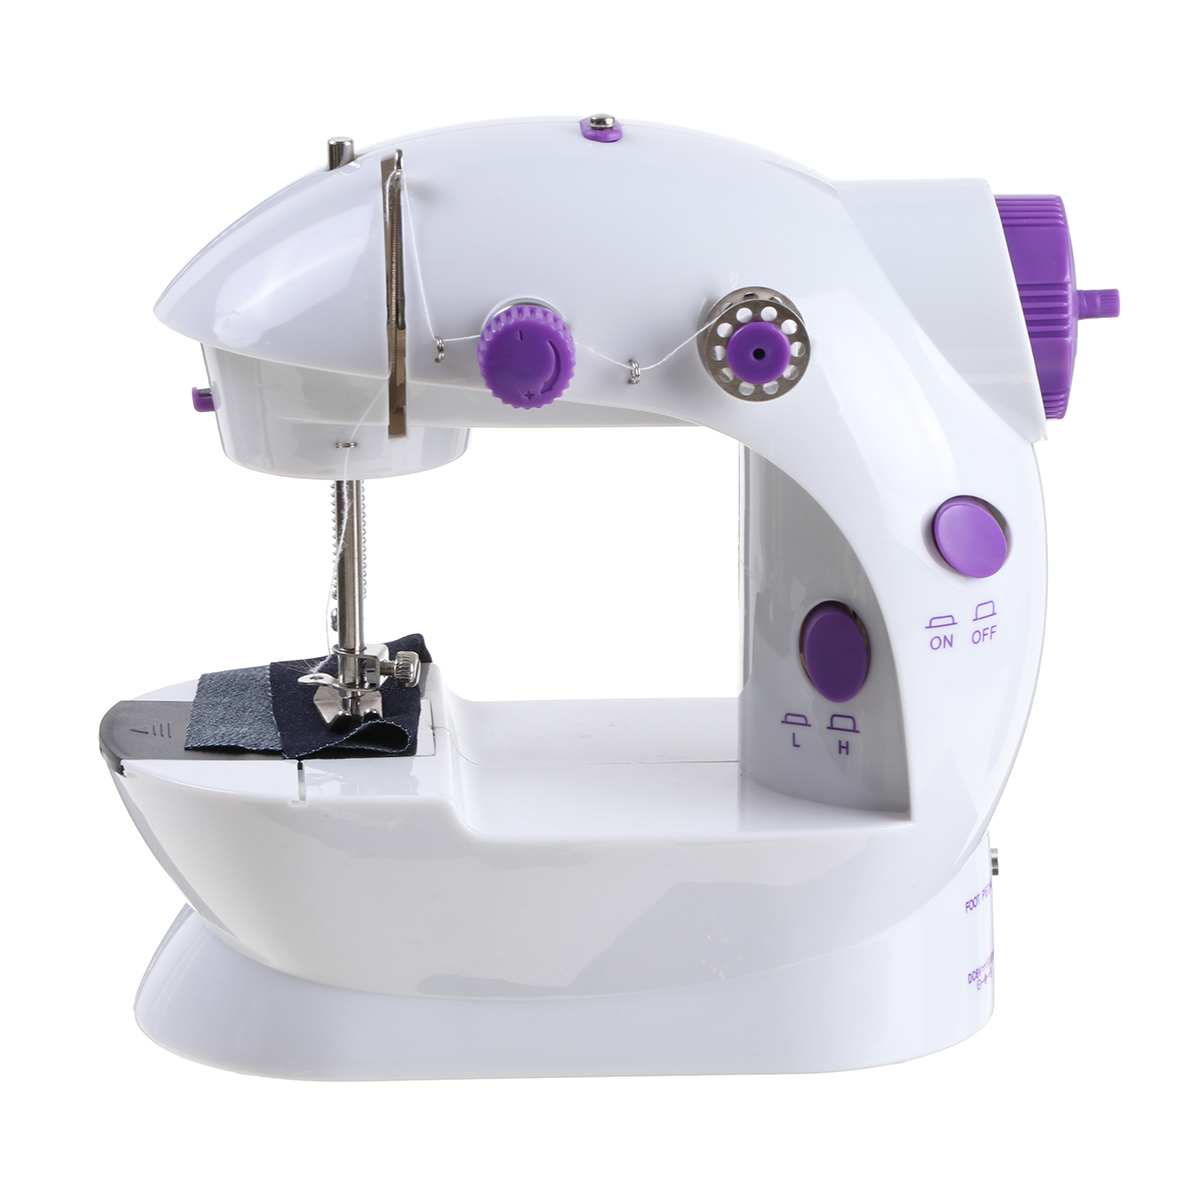 Rechargeable-Portable-Electric-Sewing-Machine-Multi-function-Household-Sewing-Machine-1753879-6